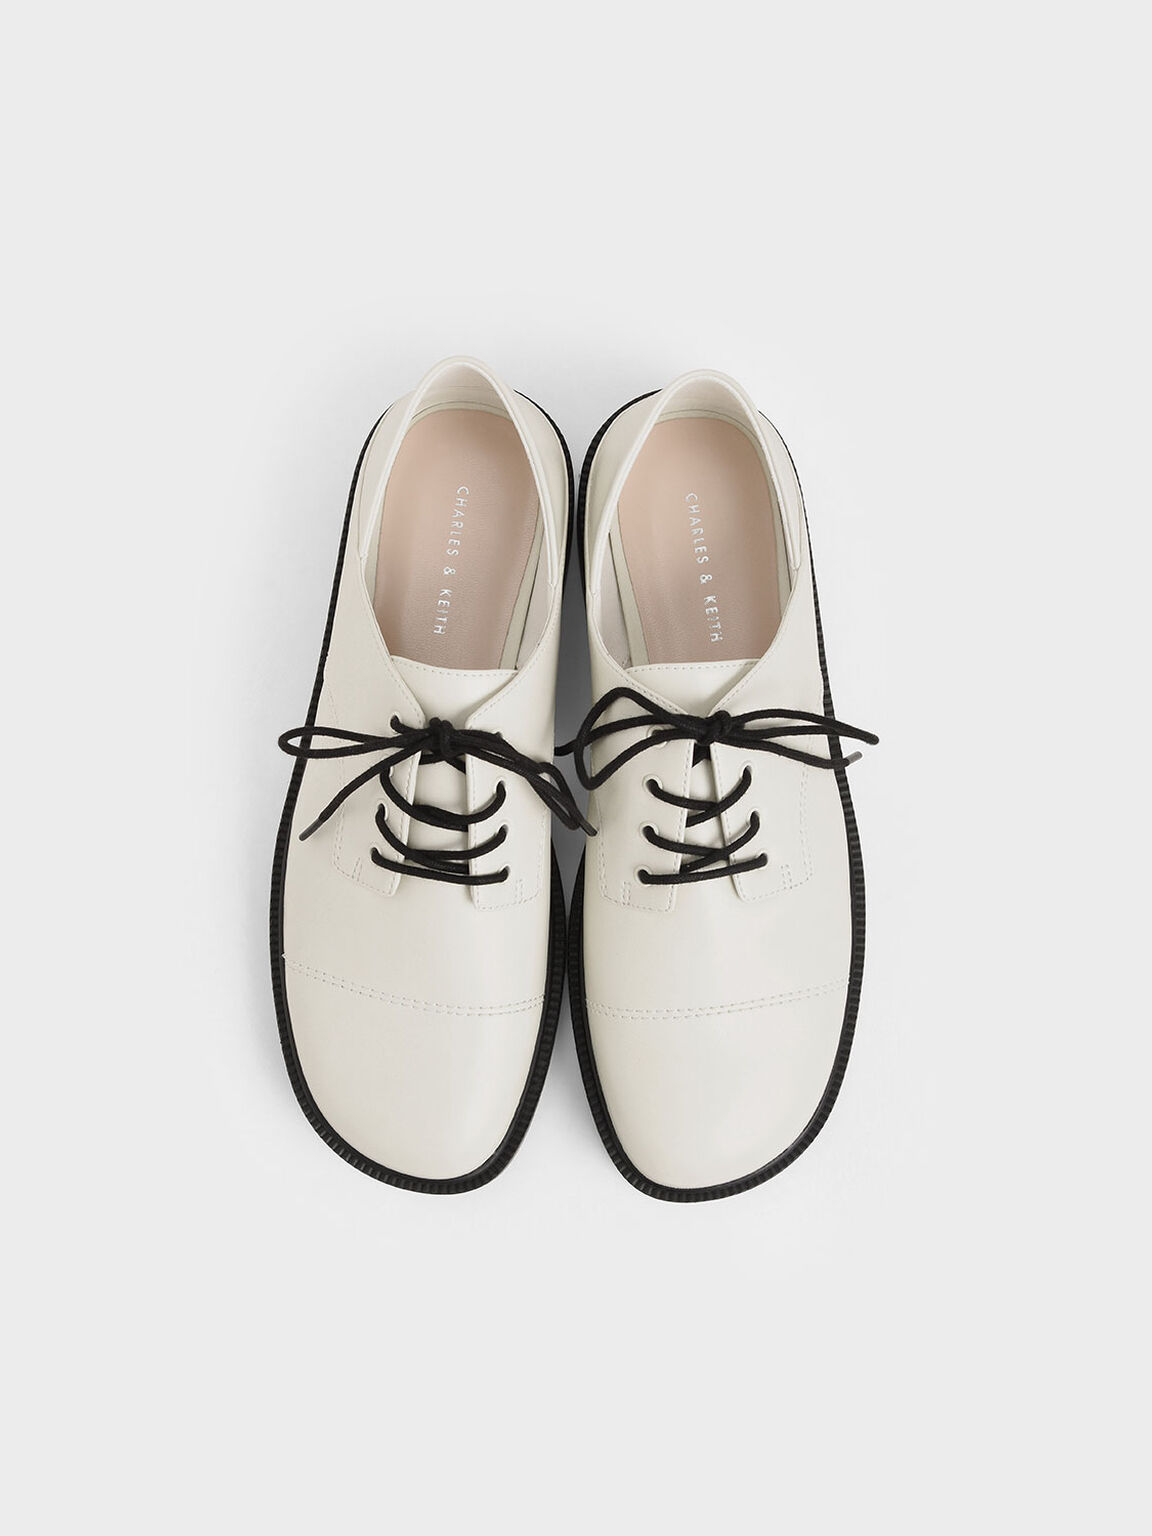 Chunky Sole Oxford Shoes, Chalk, hi-res